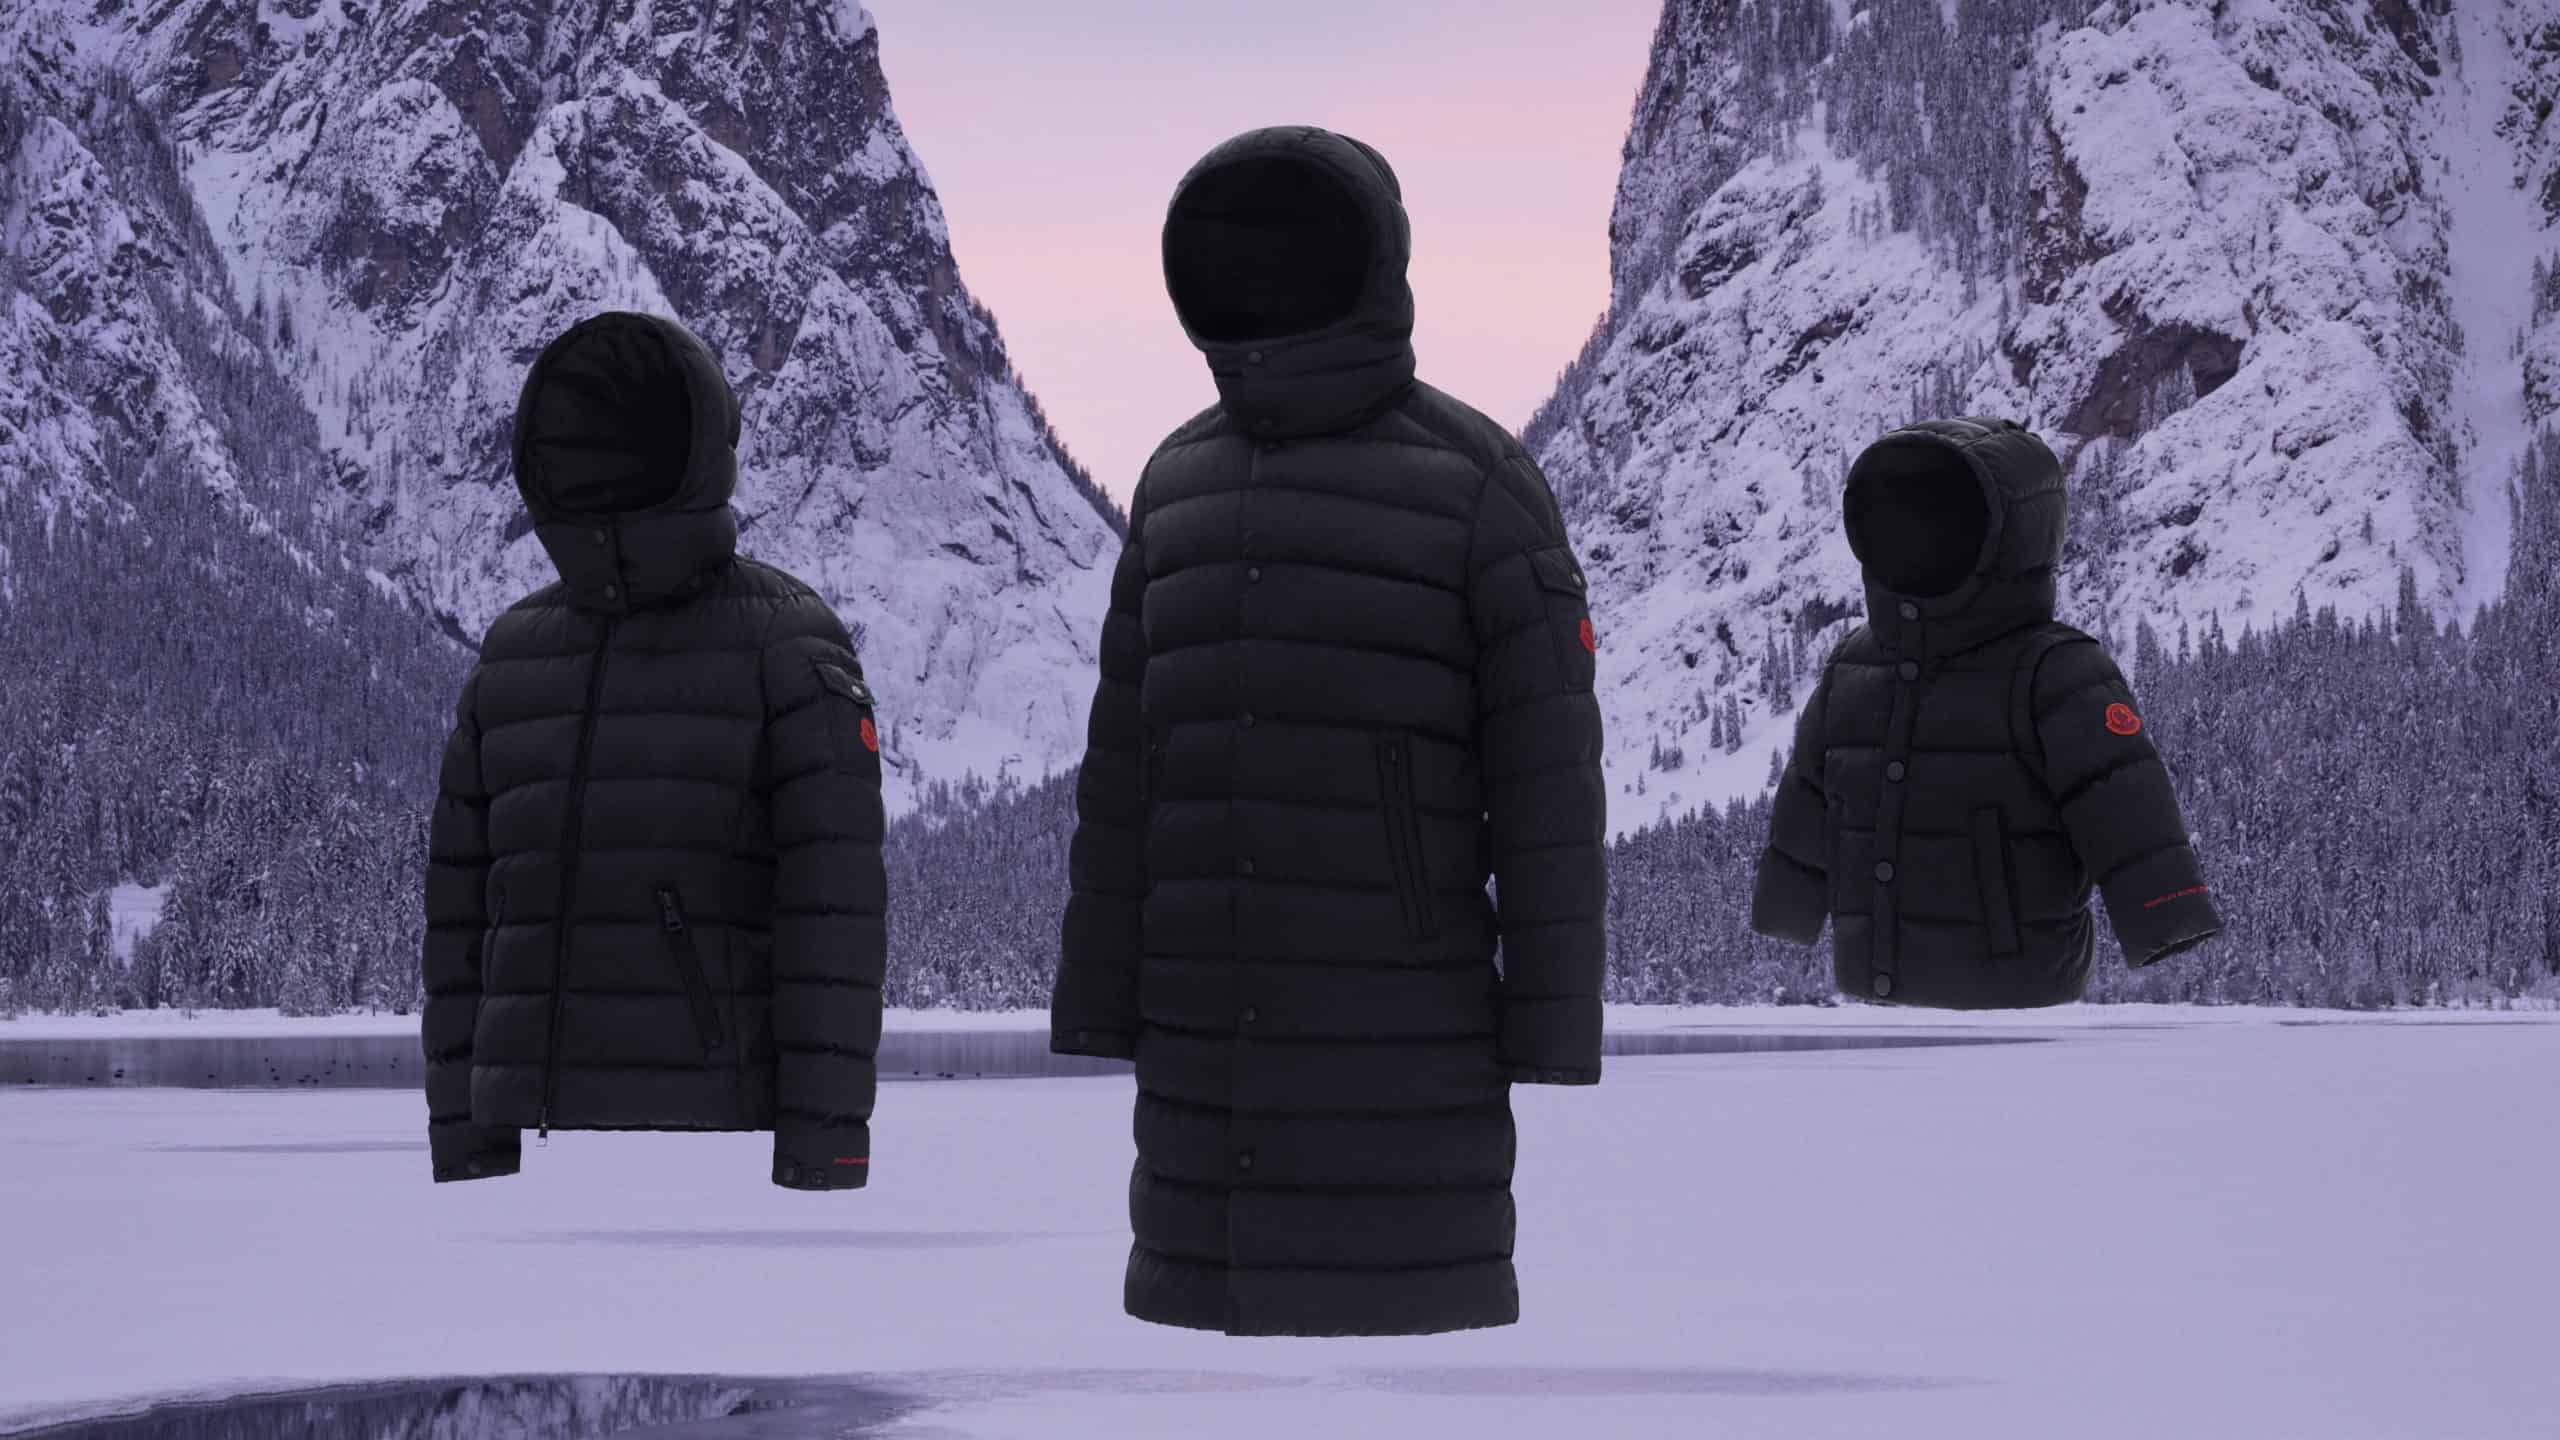 Moncler's New Sustainable Jacket Line Has Arrived - Daily Front Row